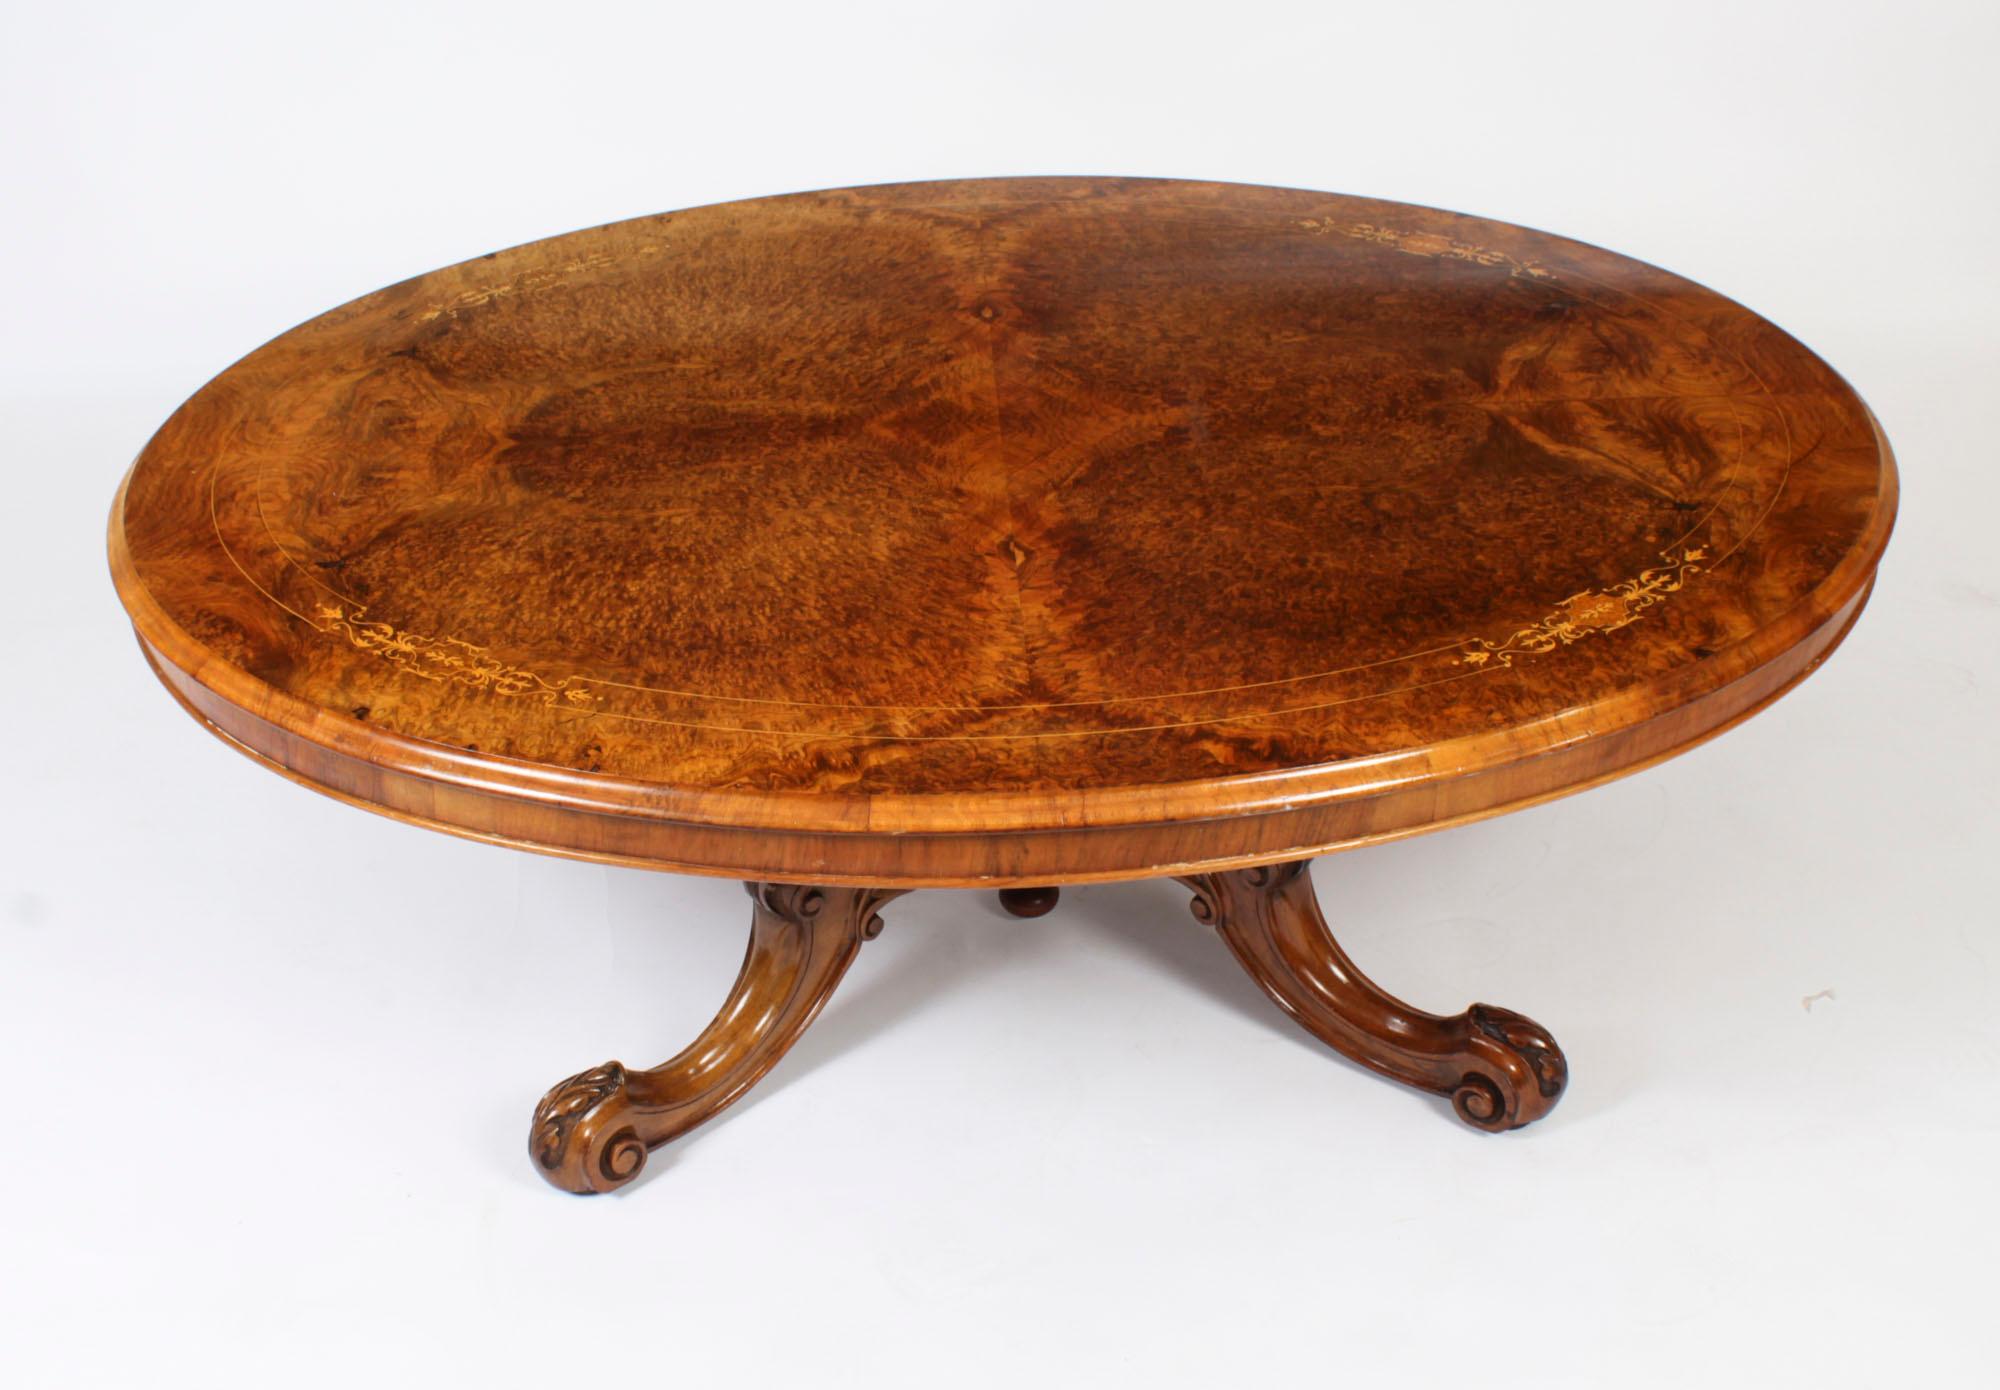 This is a superb Victorian burr walnut and marquetry coffee table, circa 1860 in date.

The table top is oval in shape and features wonderfully figured burr walnut with superb boxwood stringing and marquetry inlaid decoration. It is raised on a hand